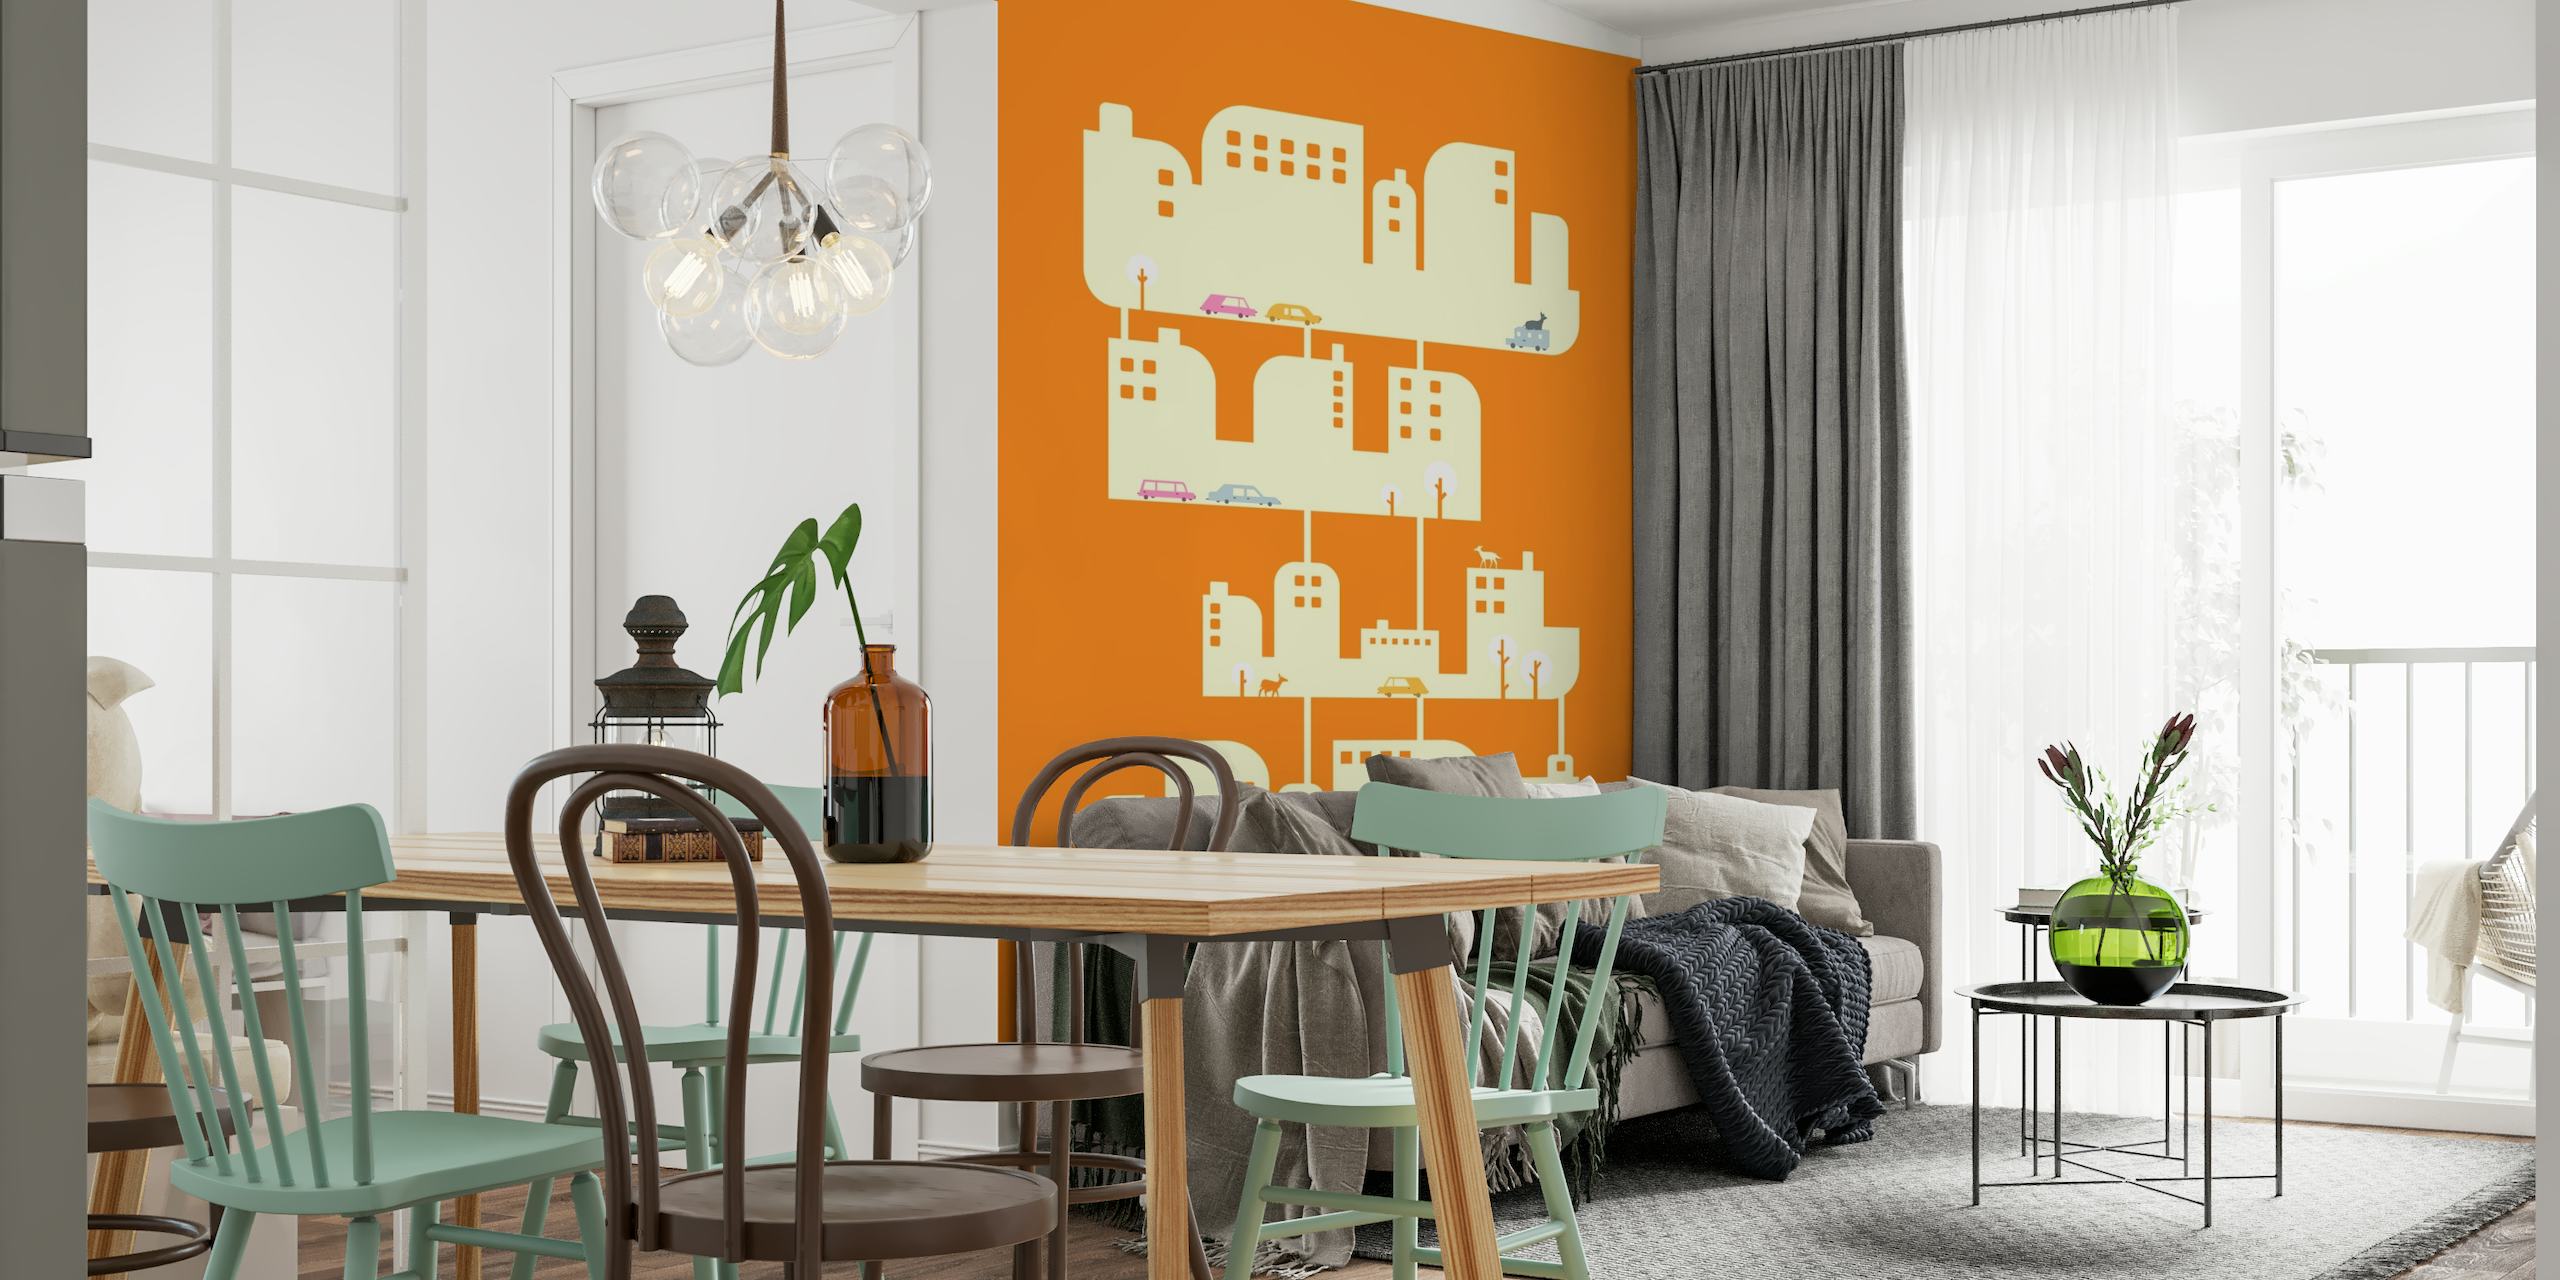 Image displaying Happywall's unique Home Print wall mural design